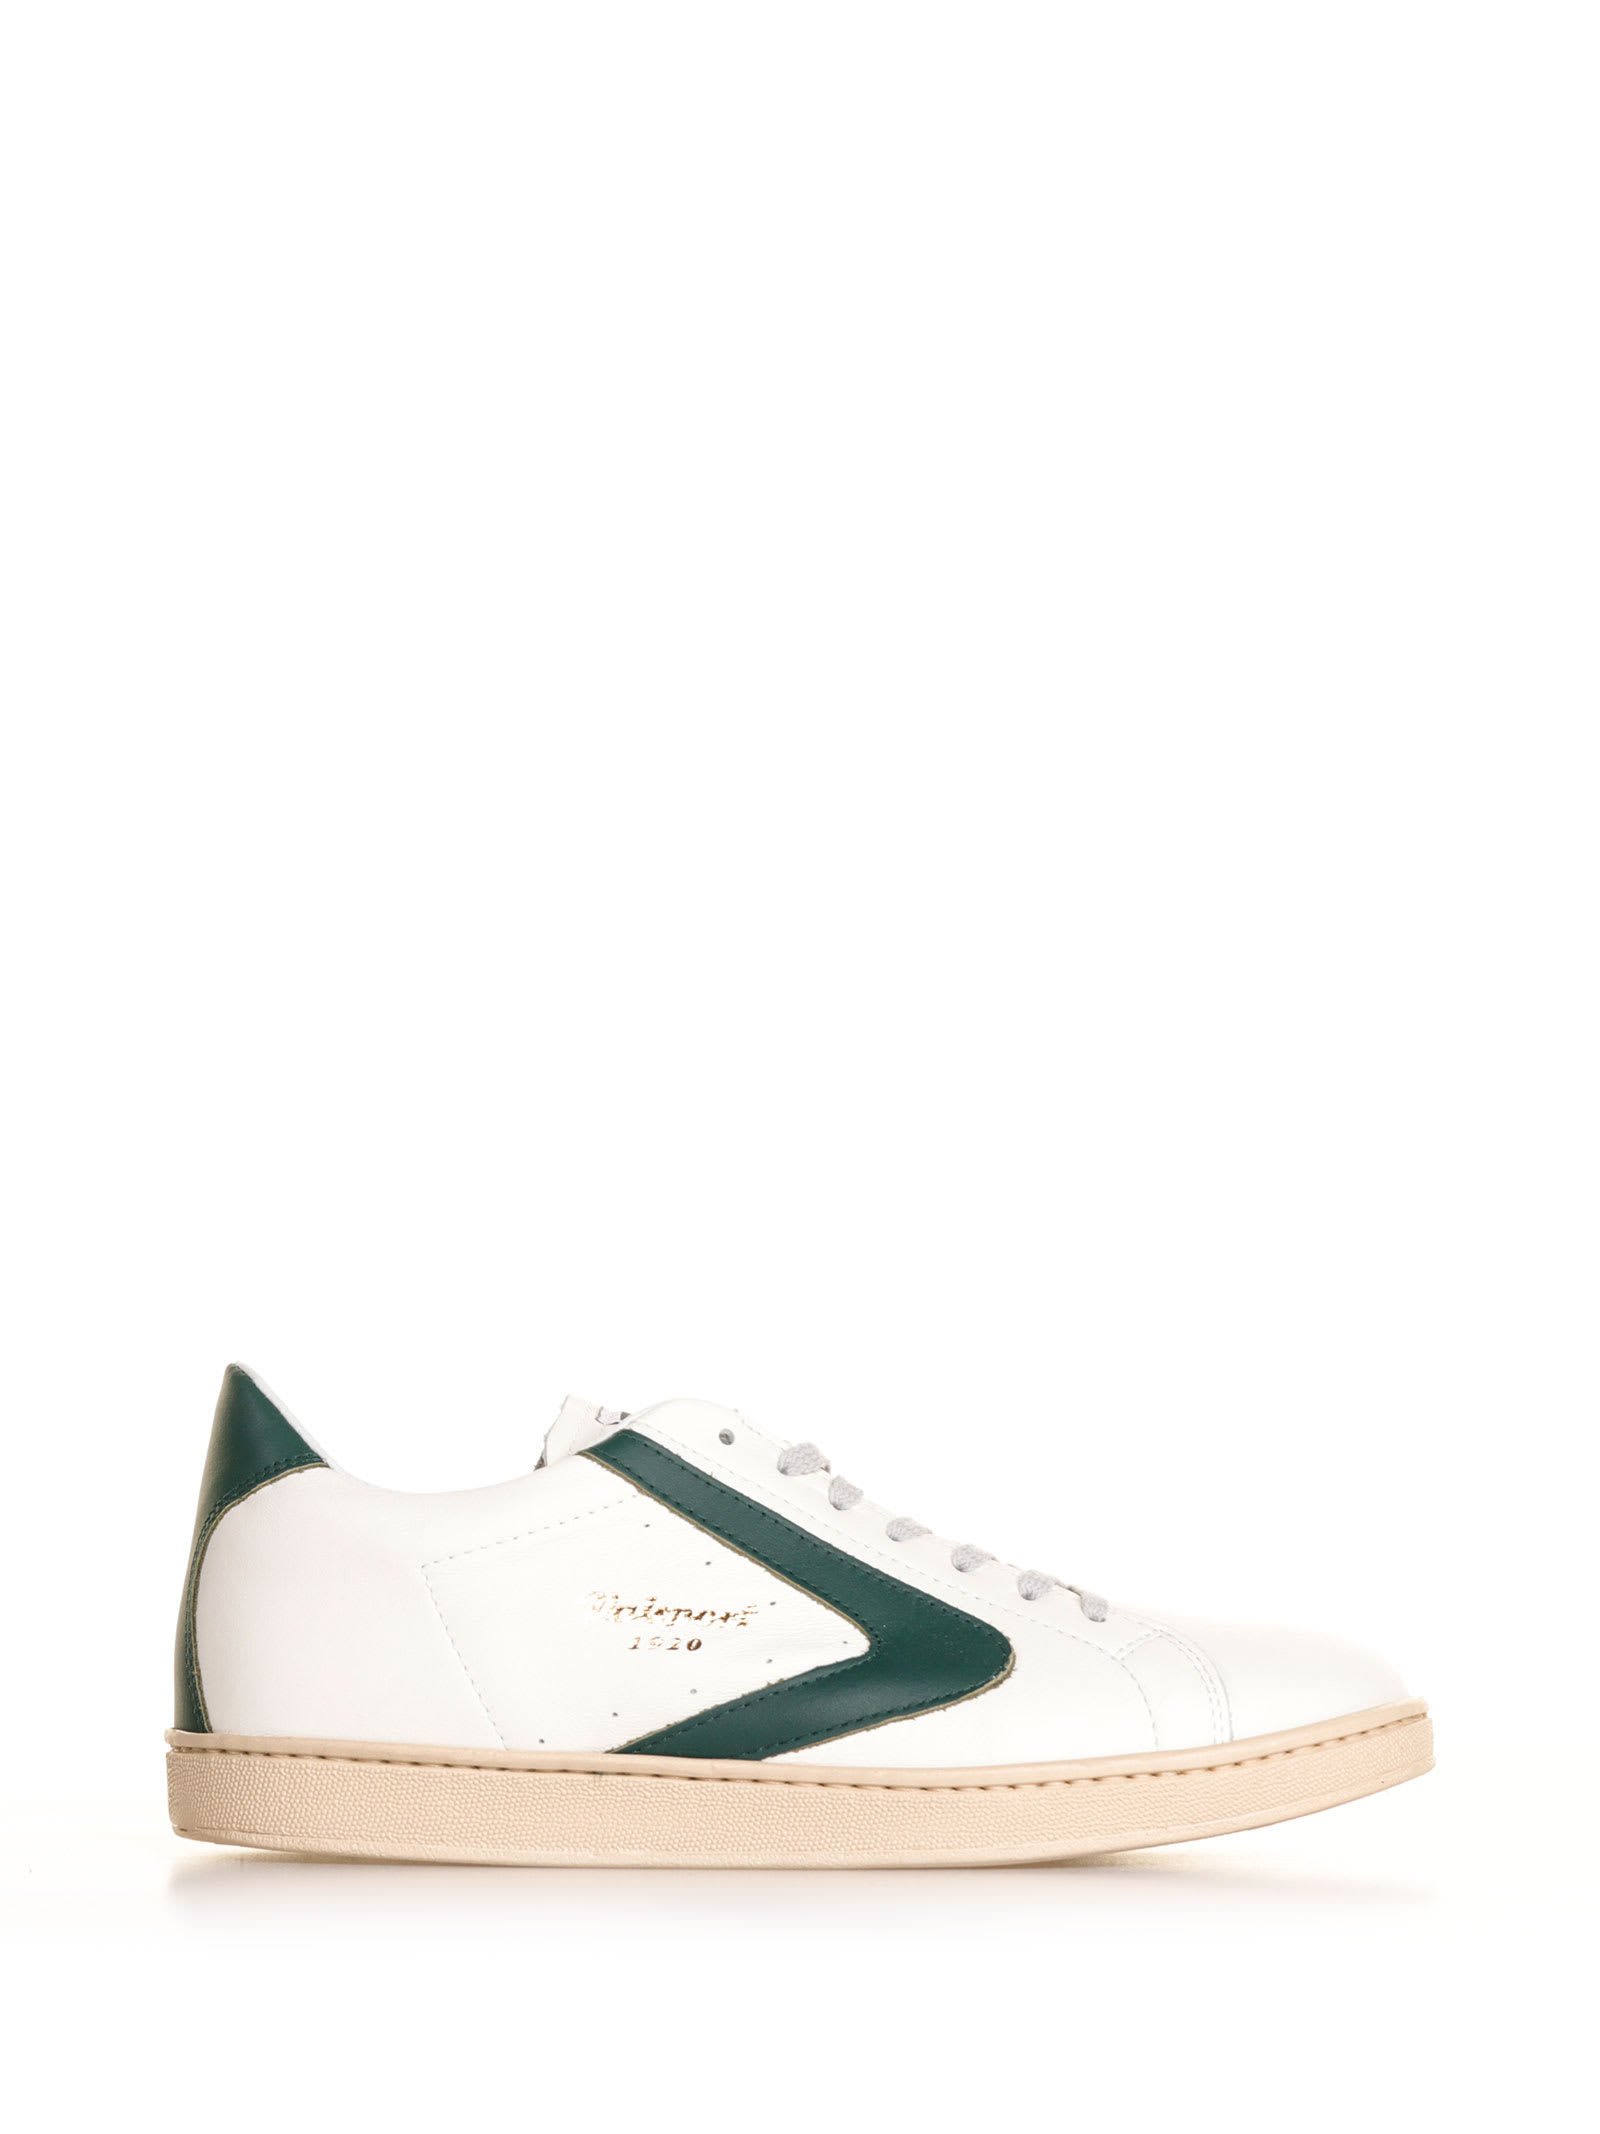 VALSPORT TOURNAMENT CLASSIC SNEAKER IN LEATHER